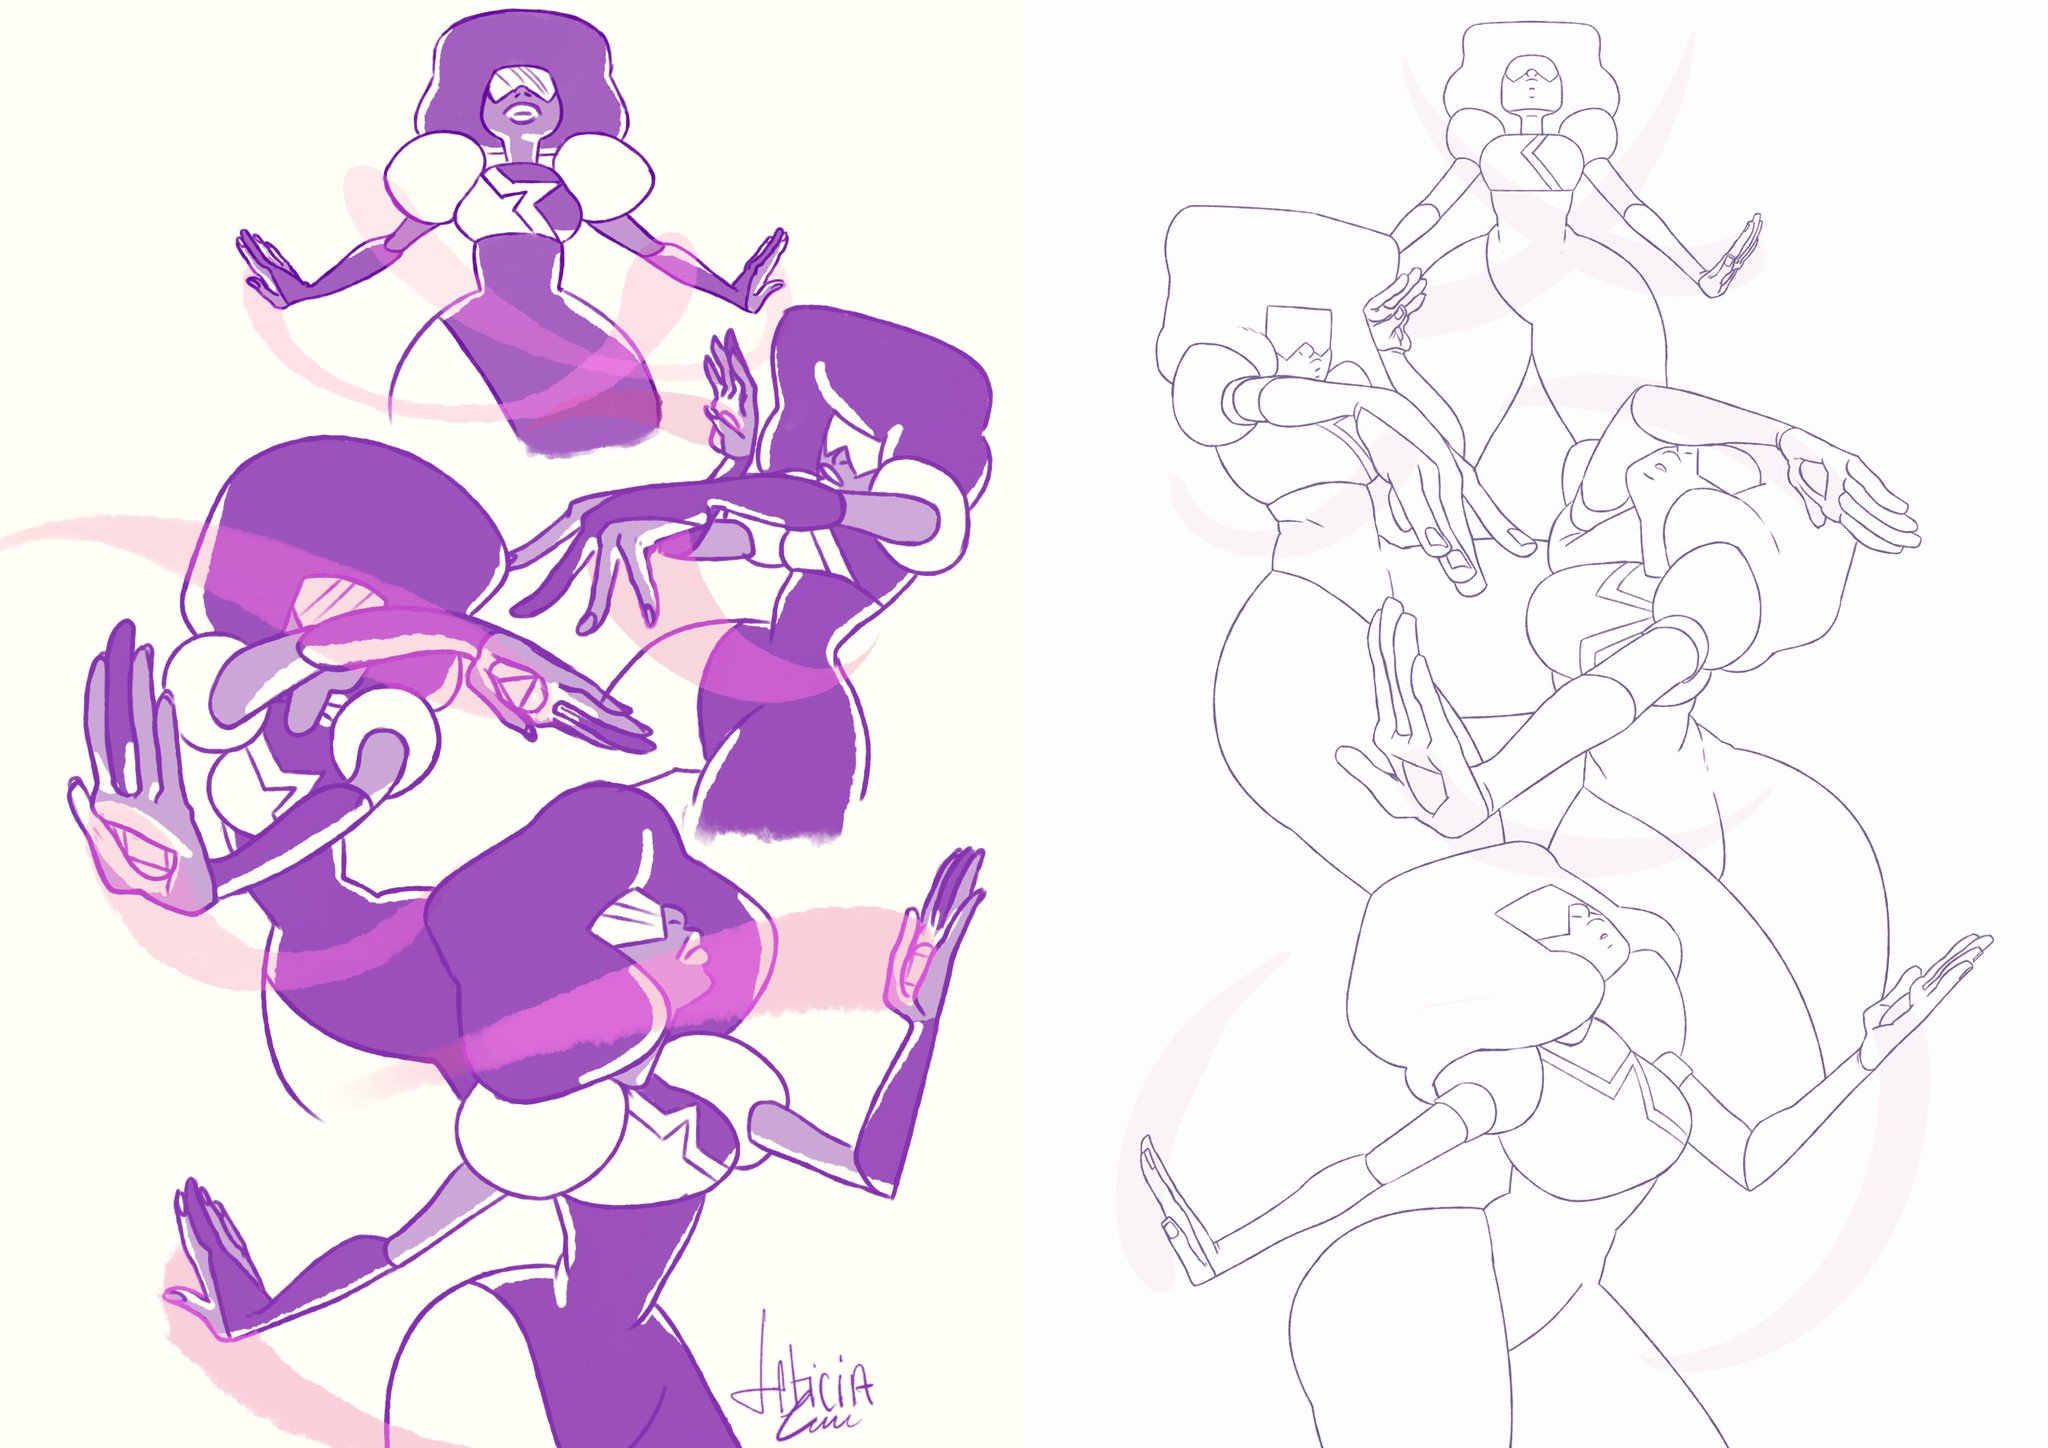 “This day last year, I made my first fanart of Garnet(the one on the left)and now, I did it again, and wow, I'm happy”